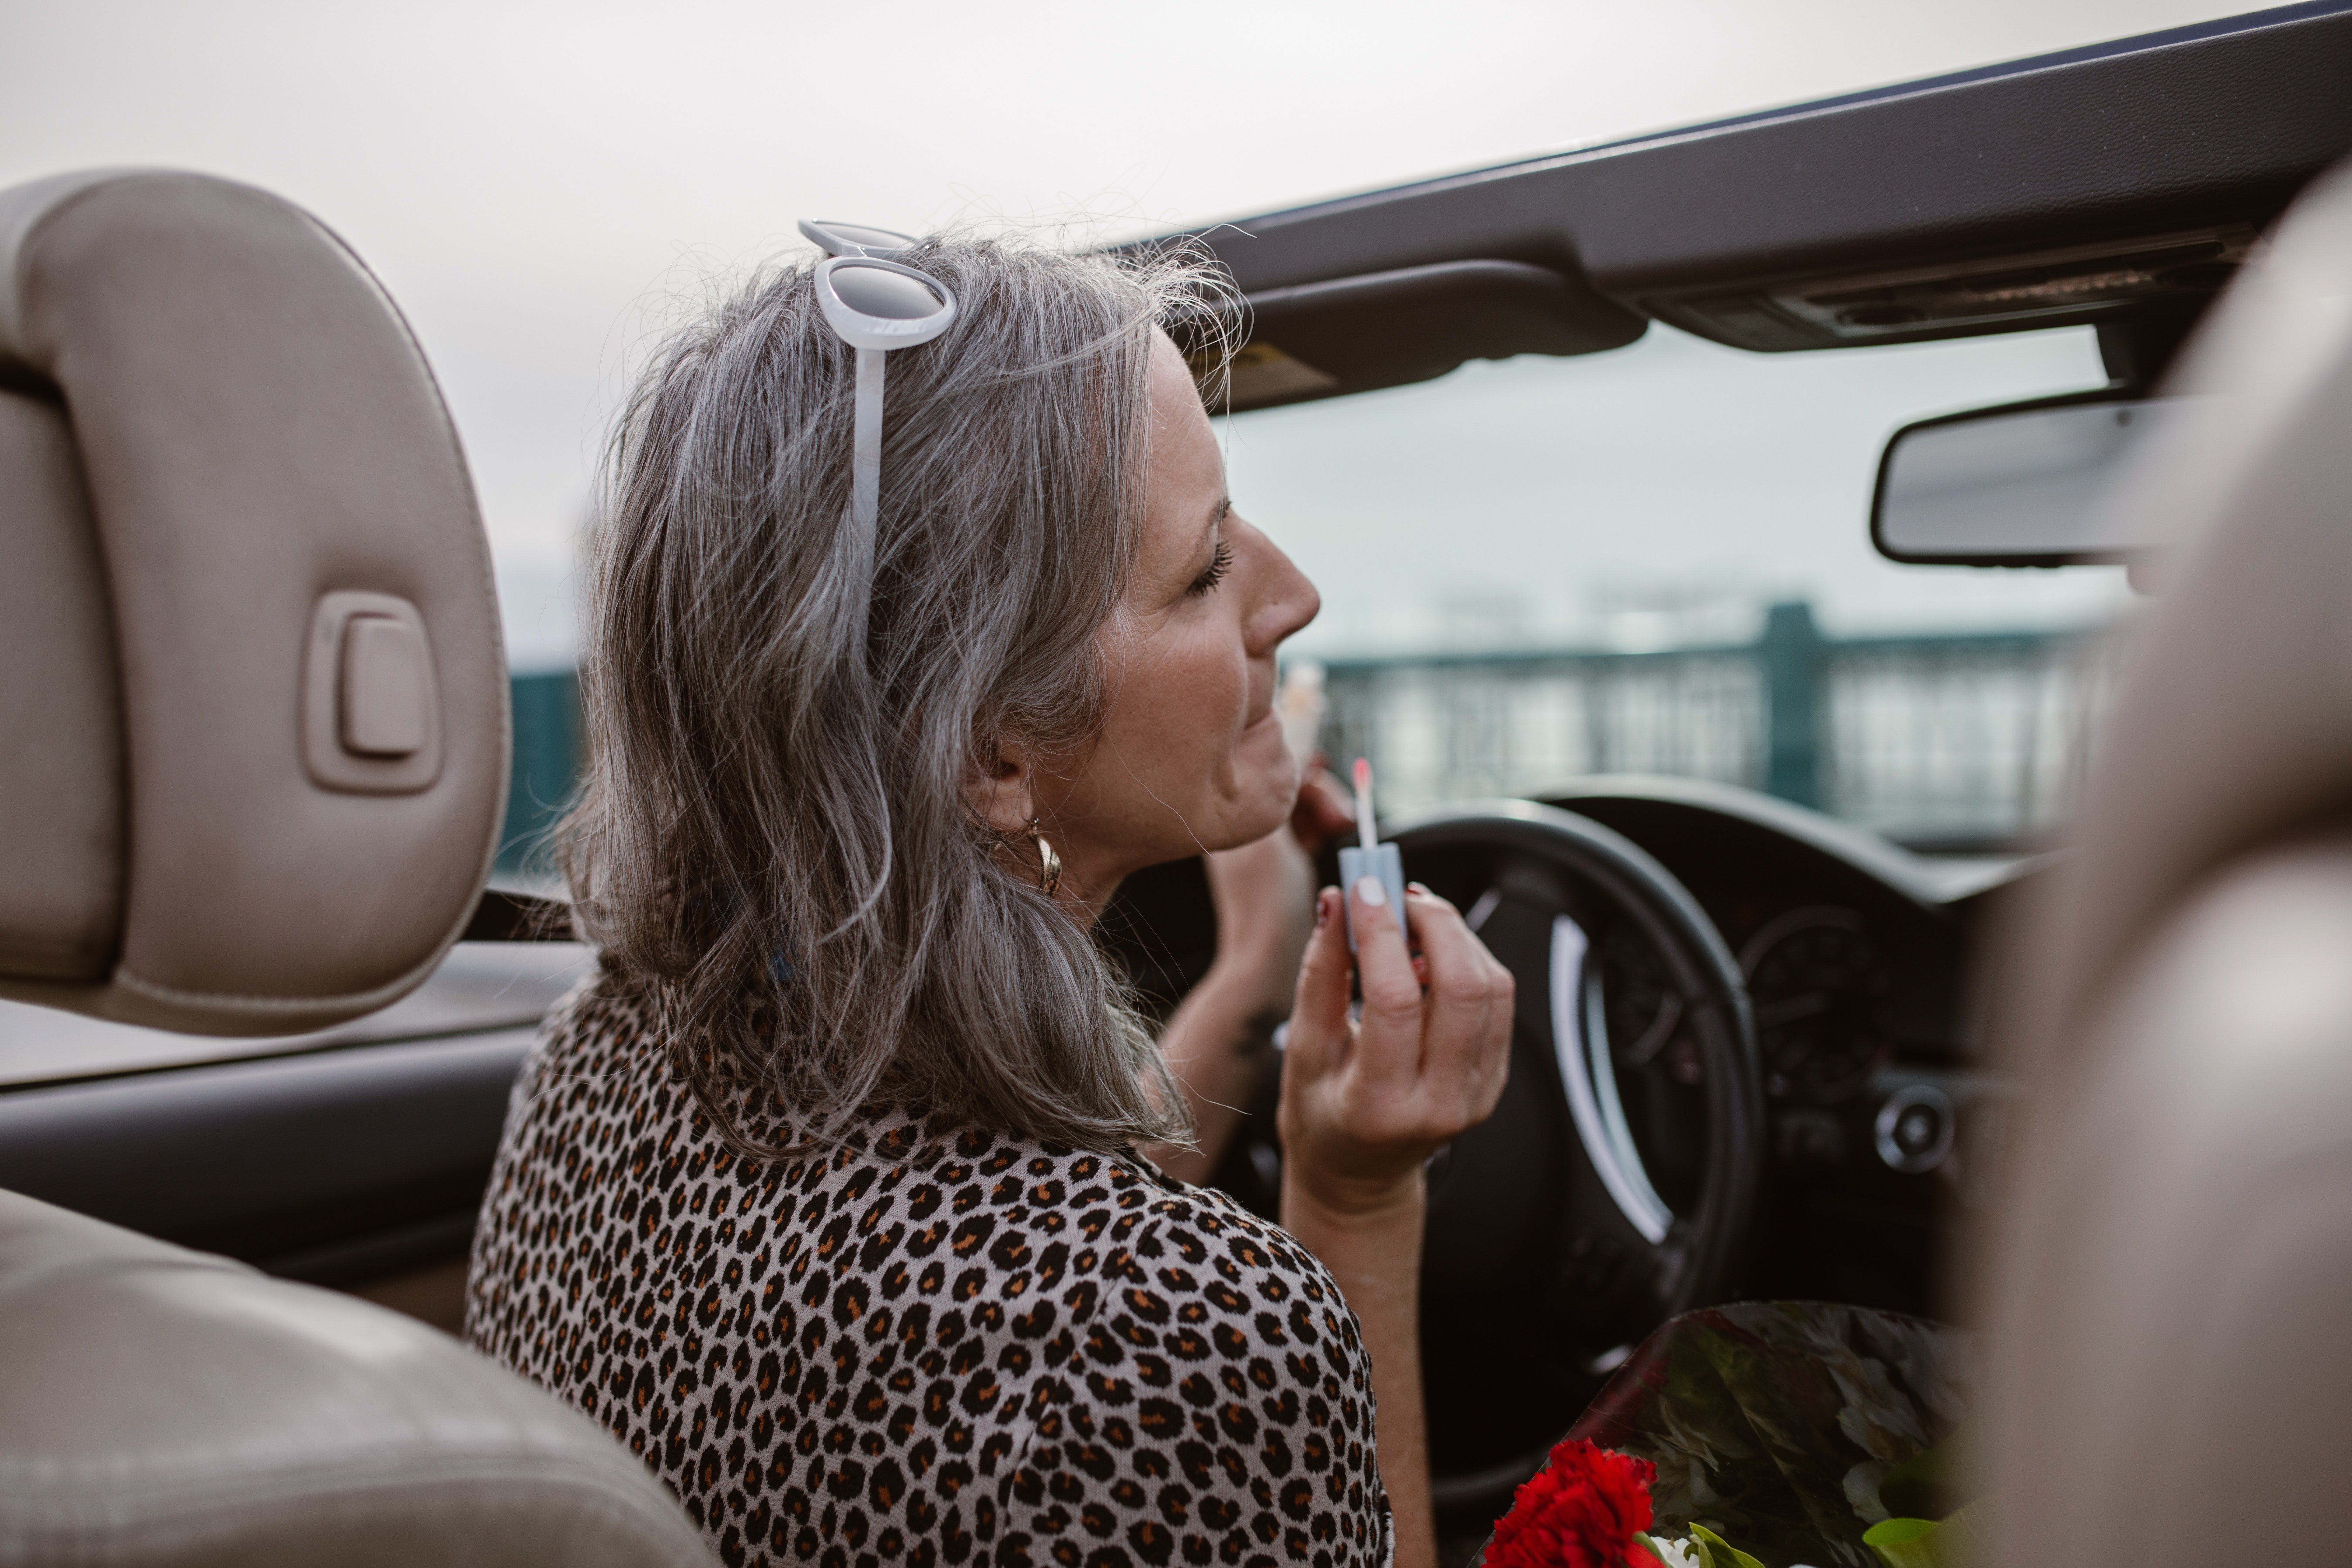 A lady sitting behind the wheel putting lipstick on. | Photo: Pexels